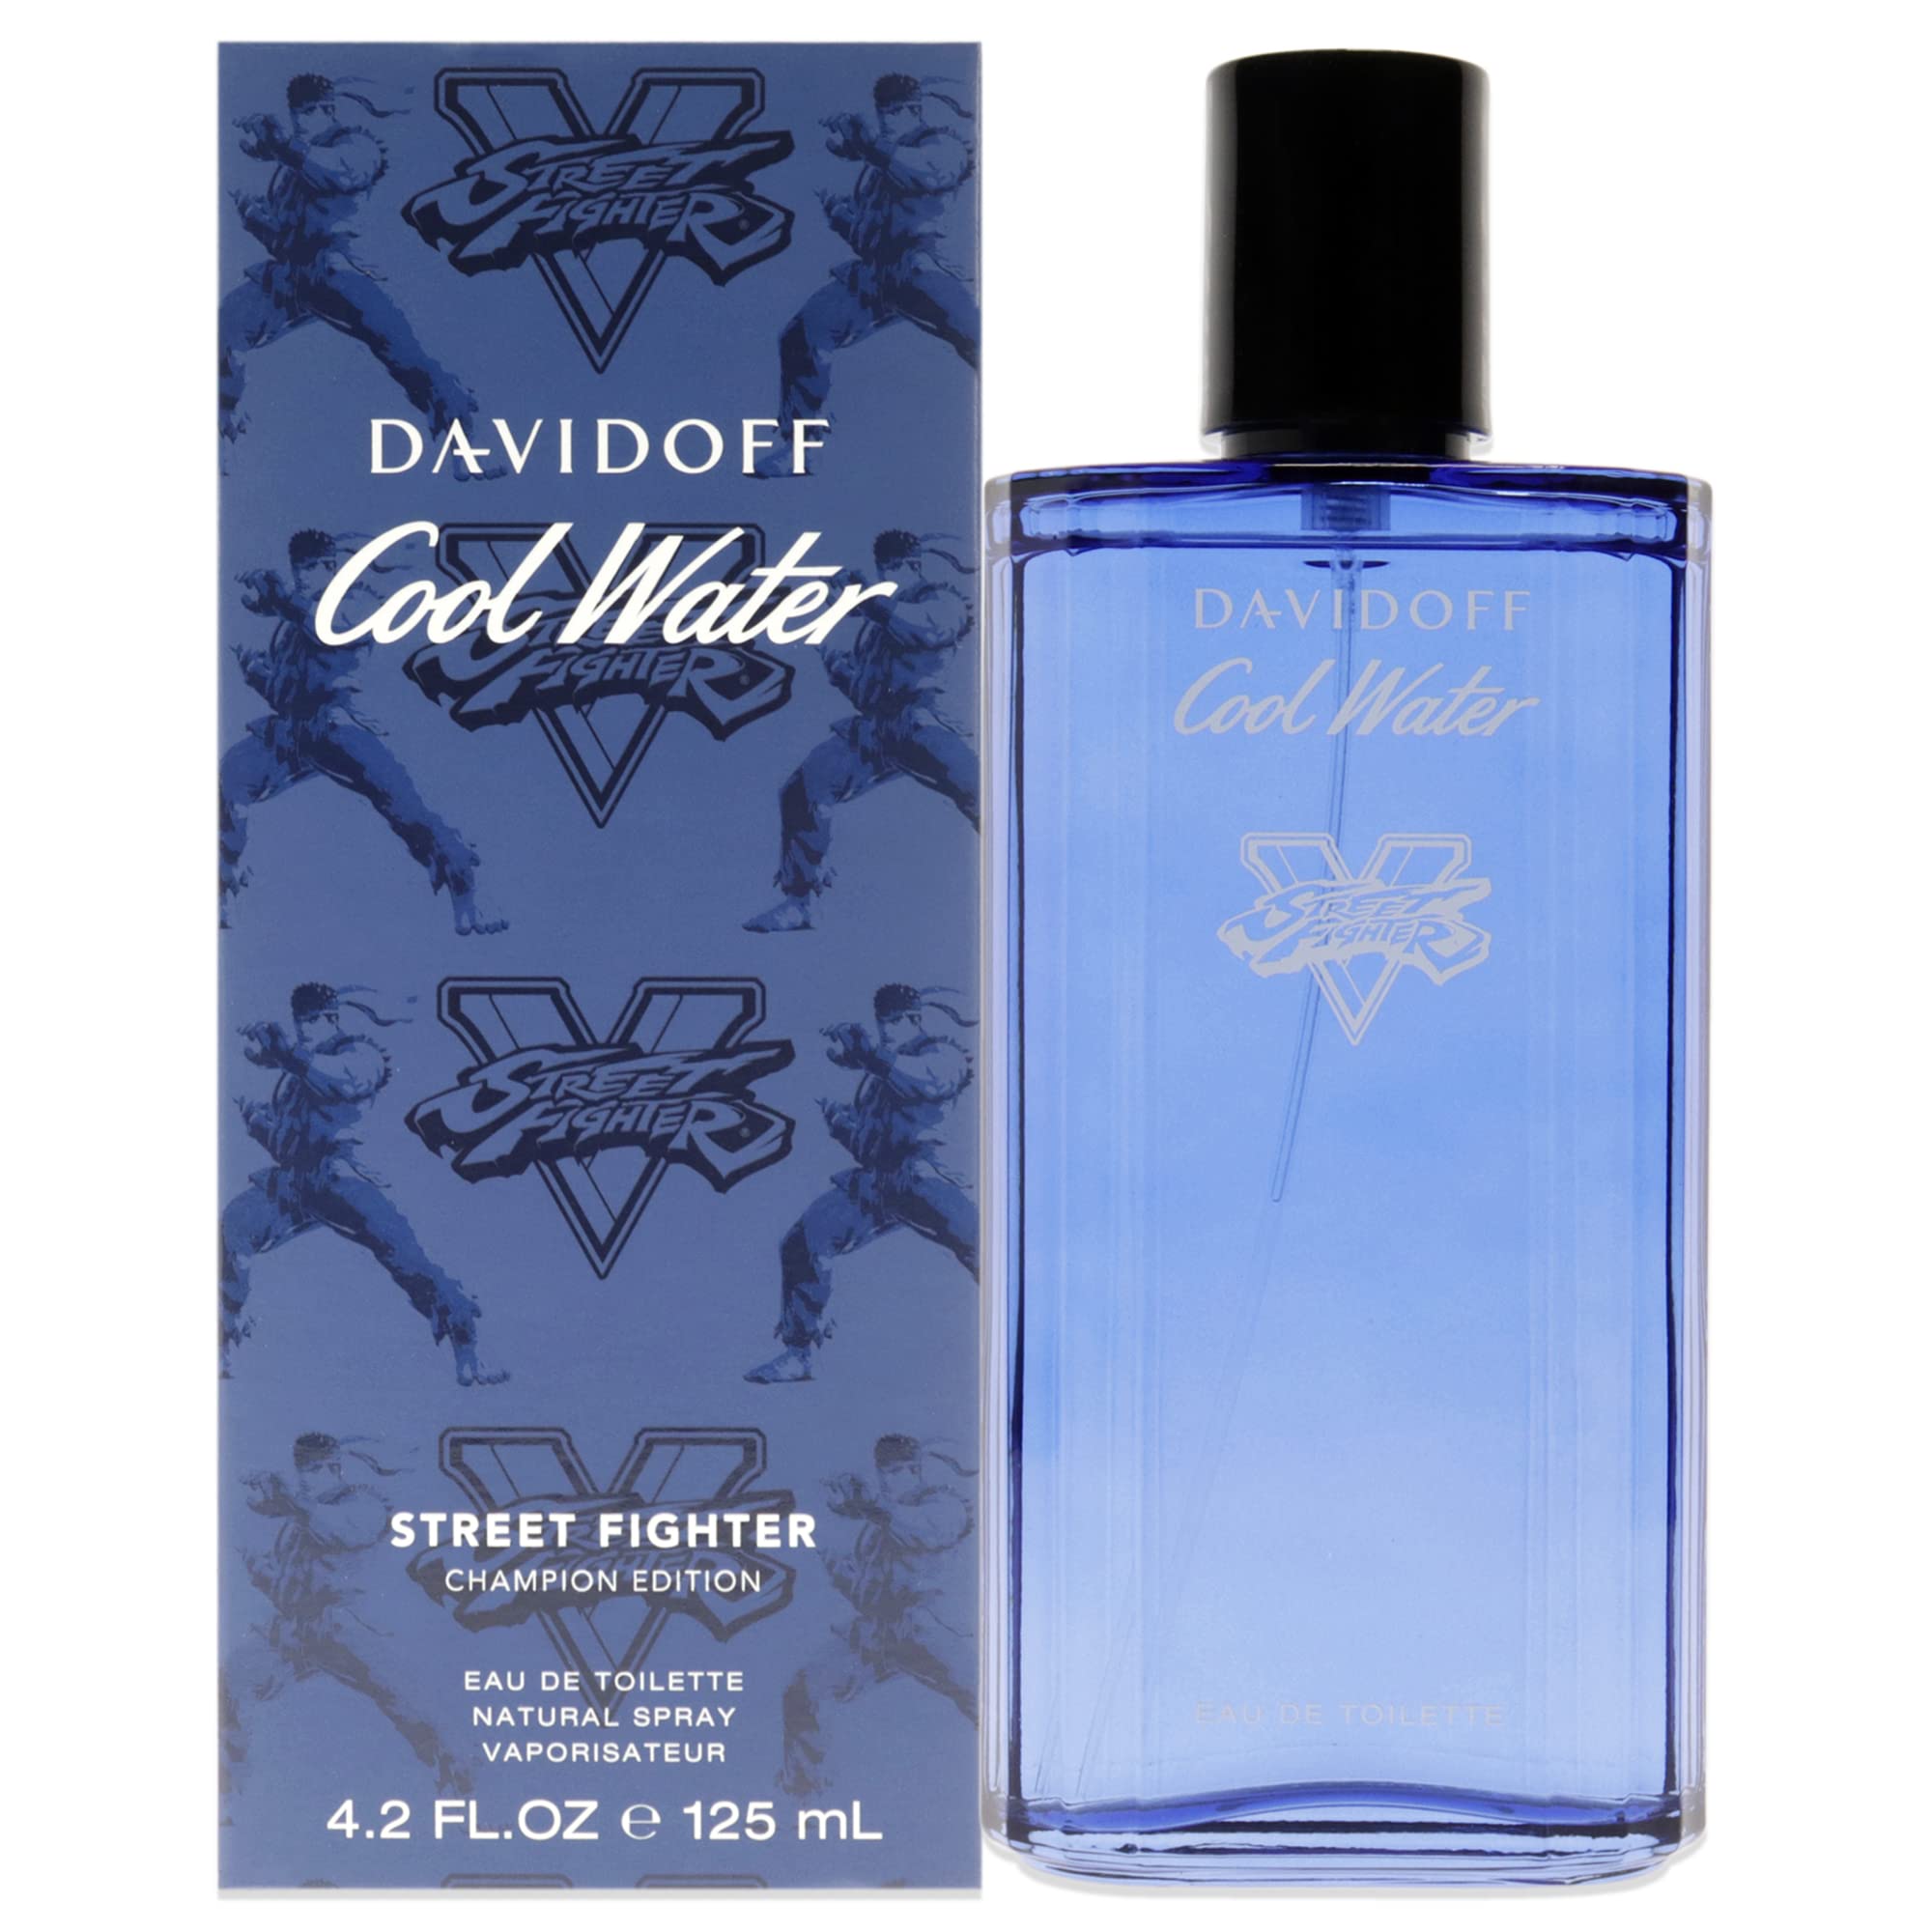 DavidOff Cool Water Street Fighter Champion EDT M 125ml Boxed